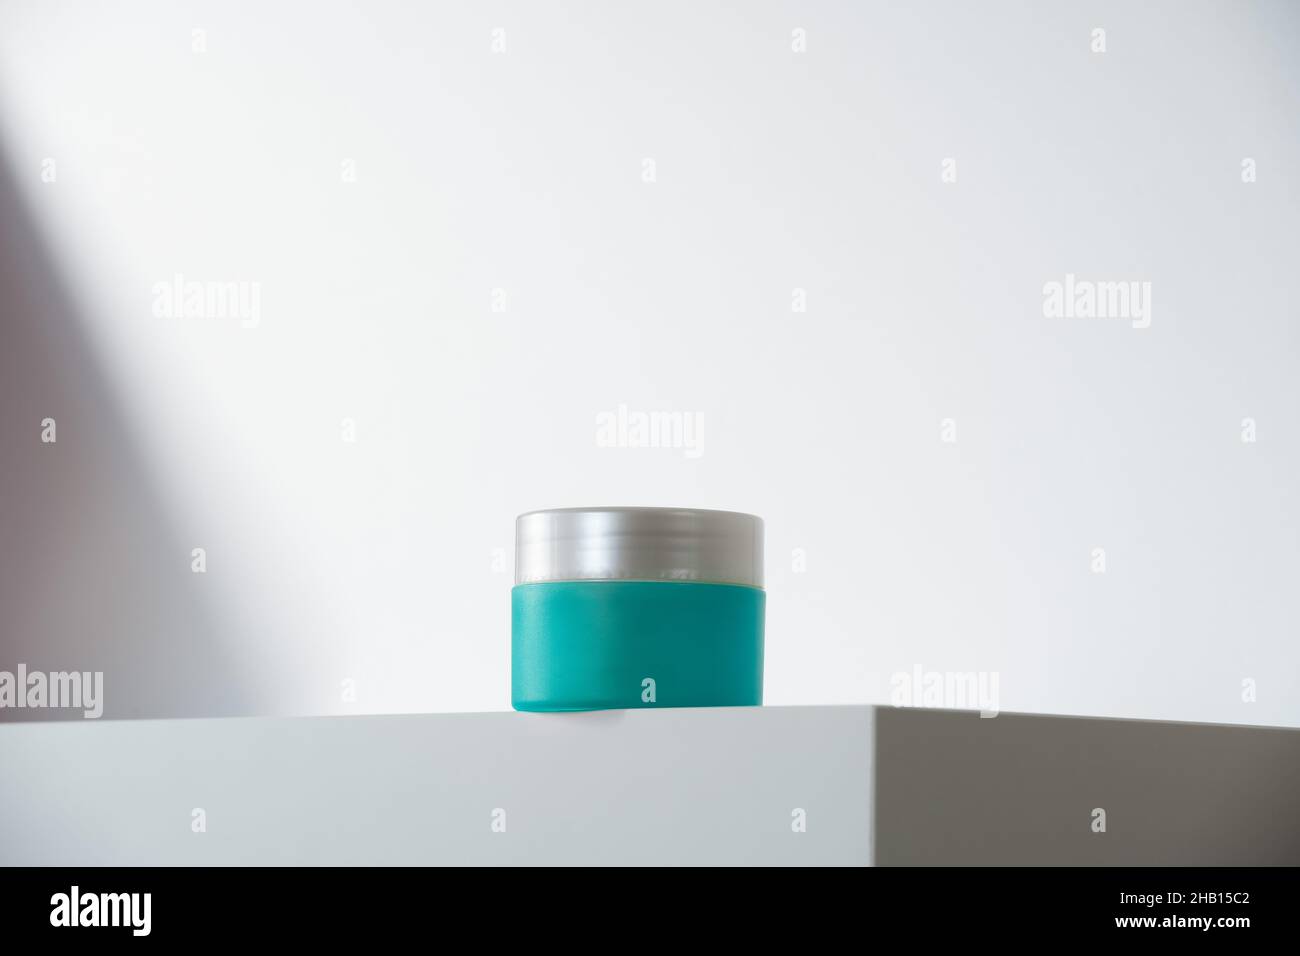 vibrant teal cream pot with silver lid on white podium and background. Modern geometric minimalism in self-care beauty. Hero shot Stock Photo